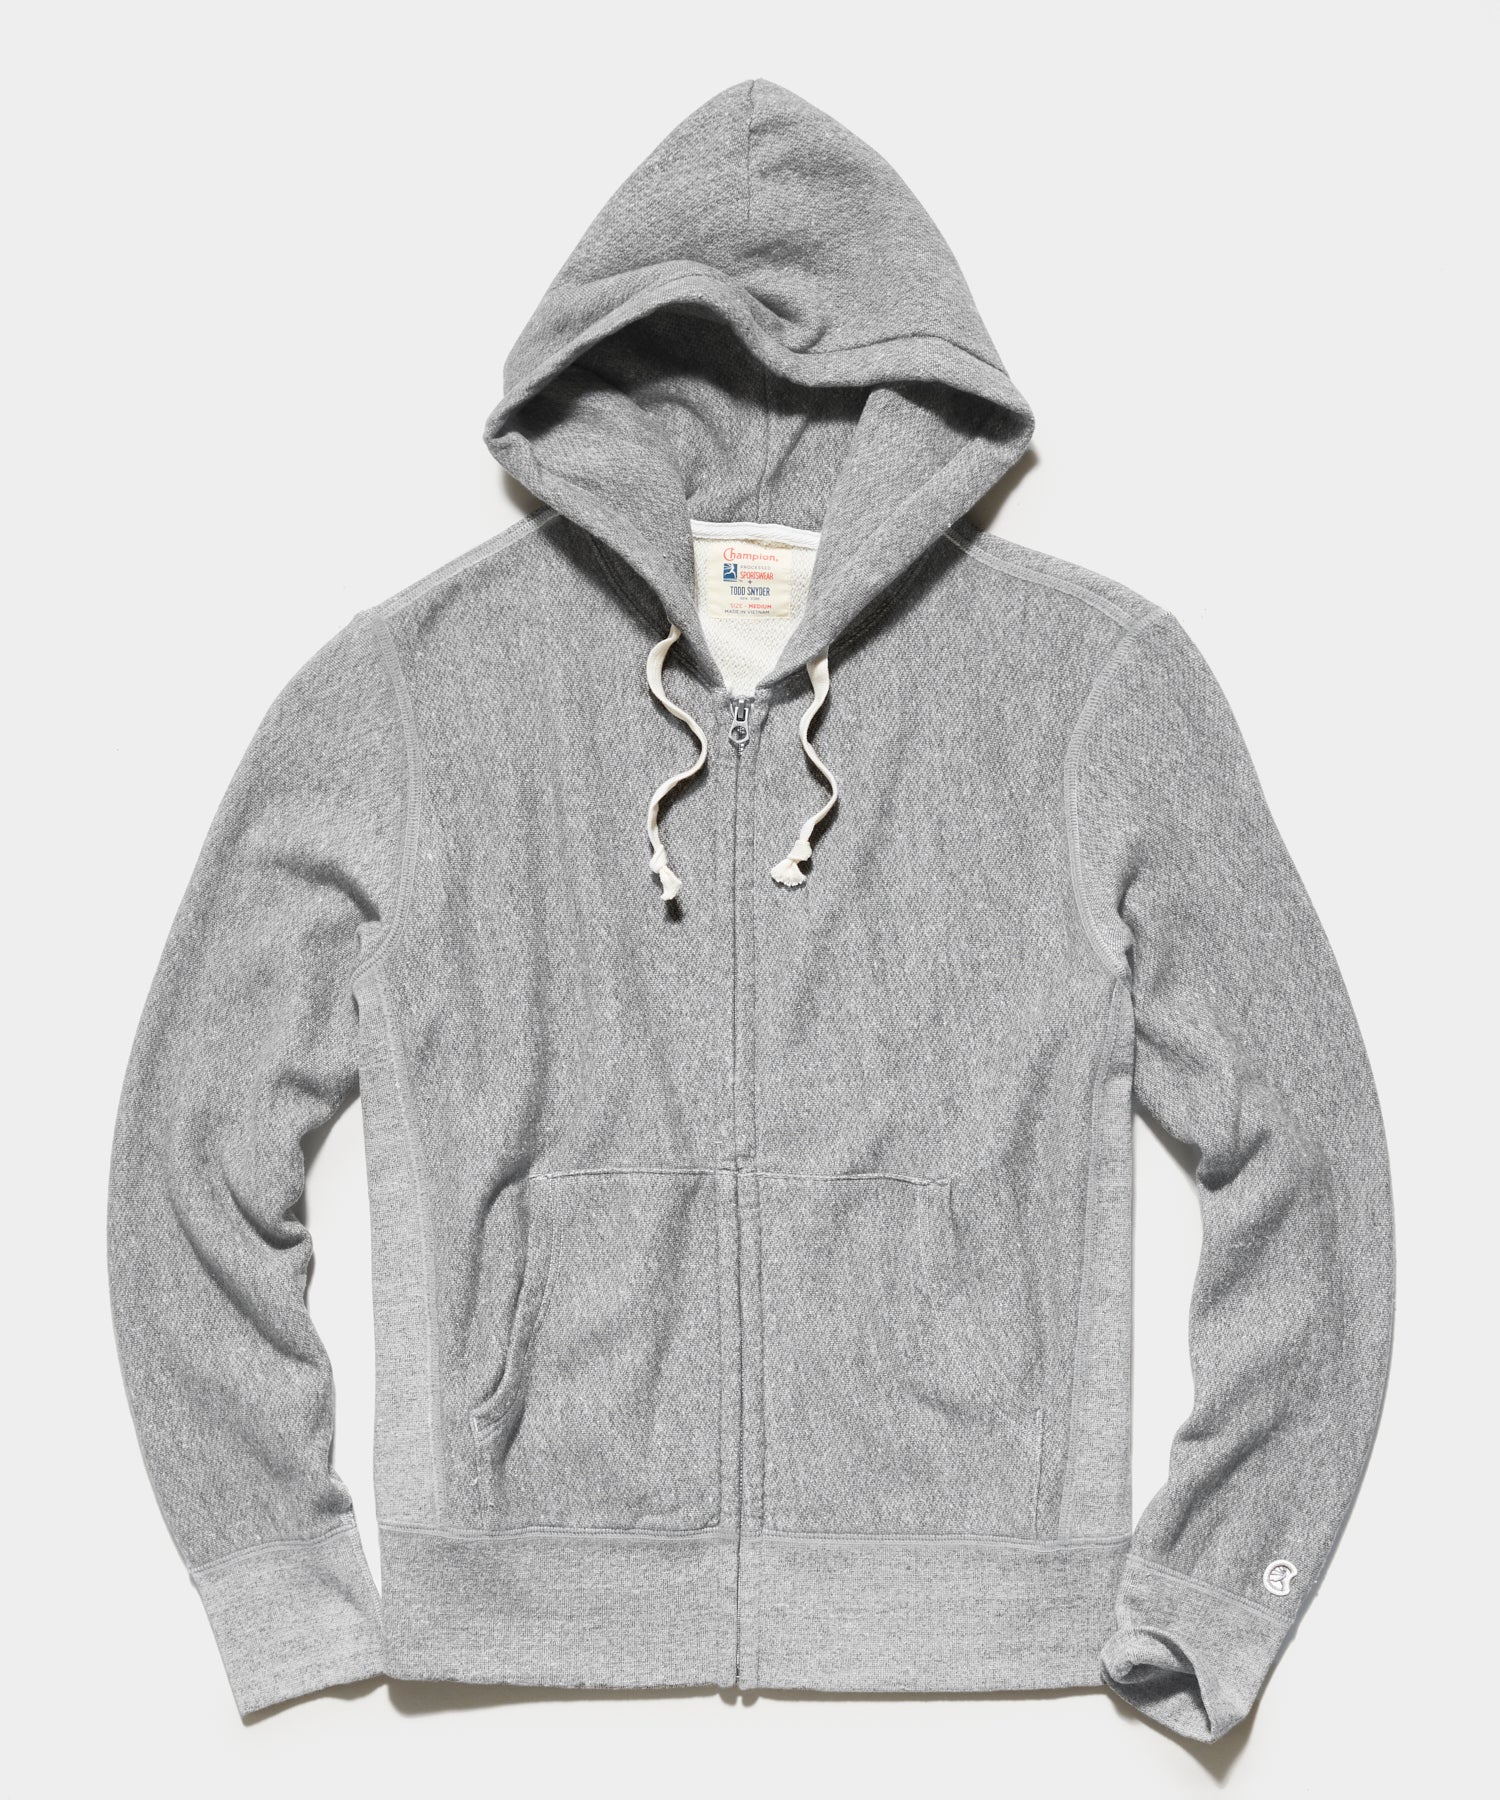 Champion Midweight Full Zip Hoodie in Antique Grey Mix